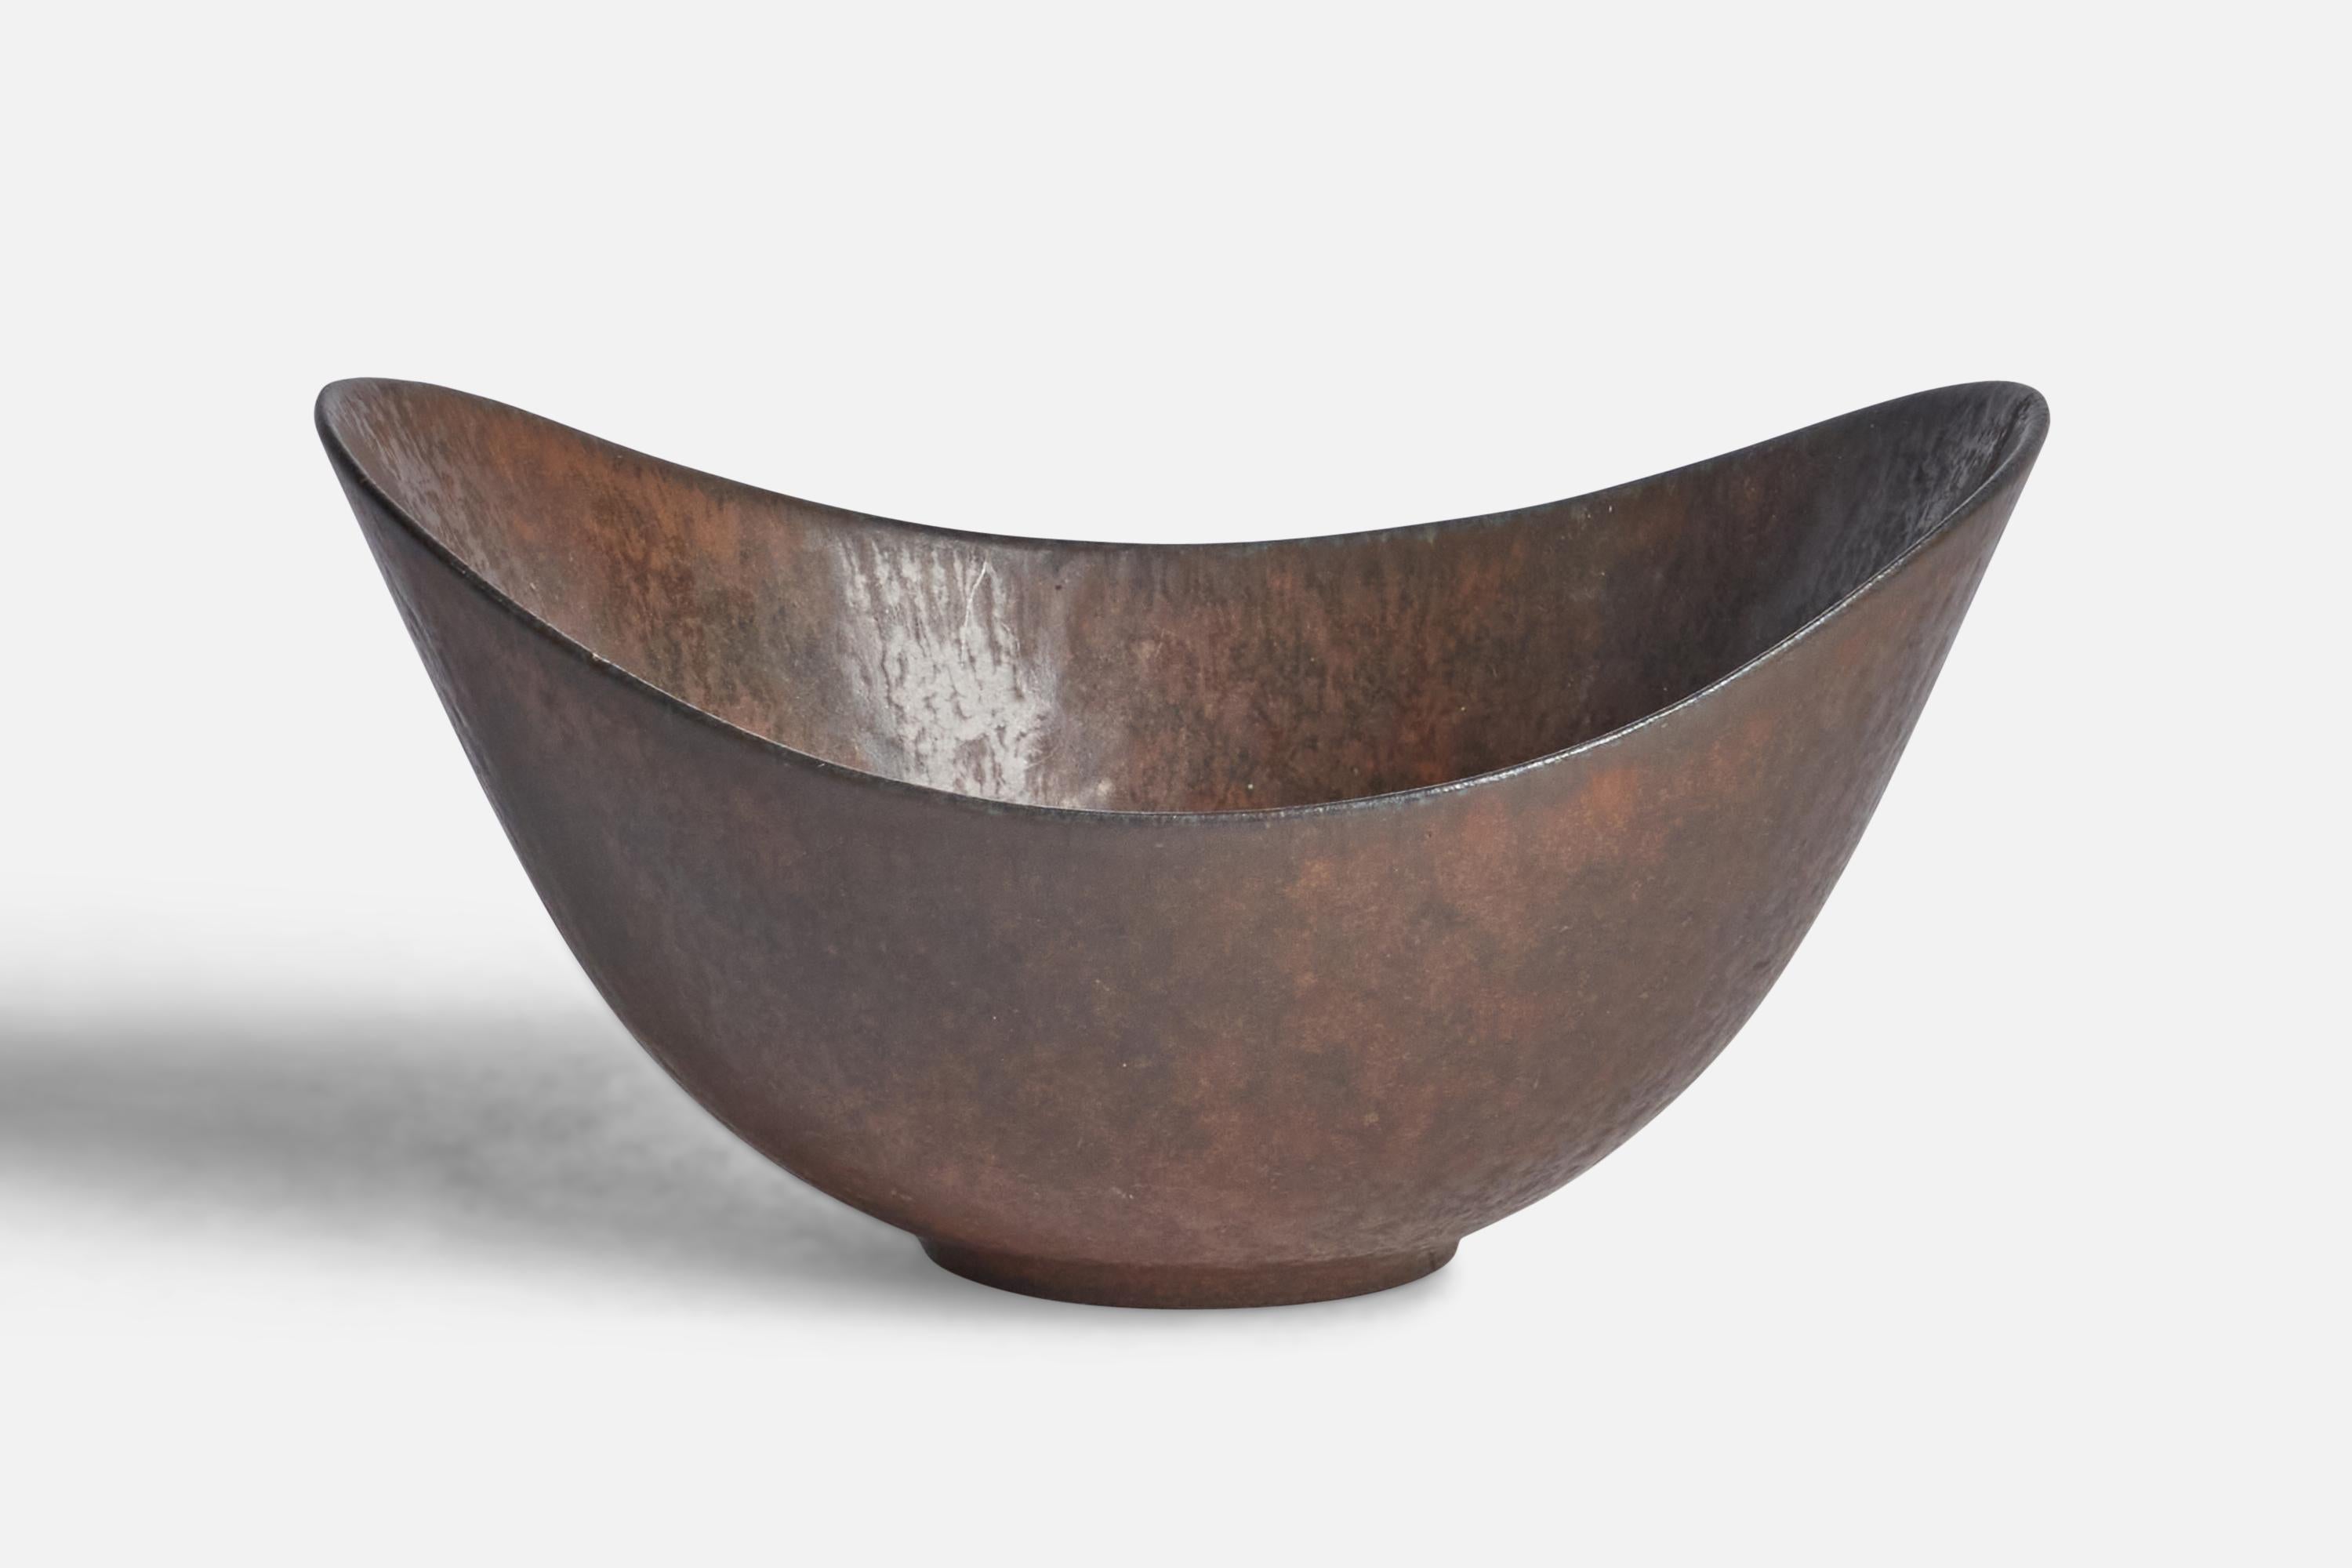 A brown-glazed stoneware bowl designed and produced in Sweden, 1940s.